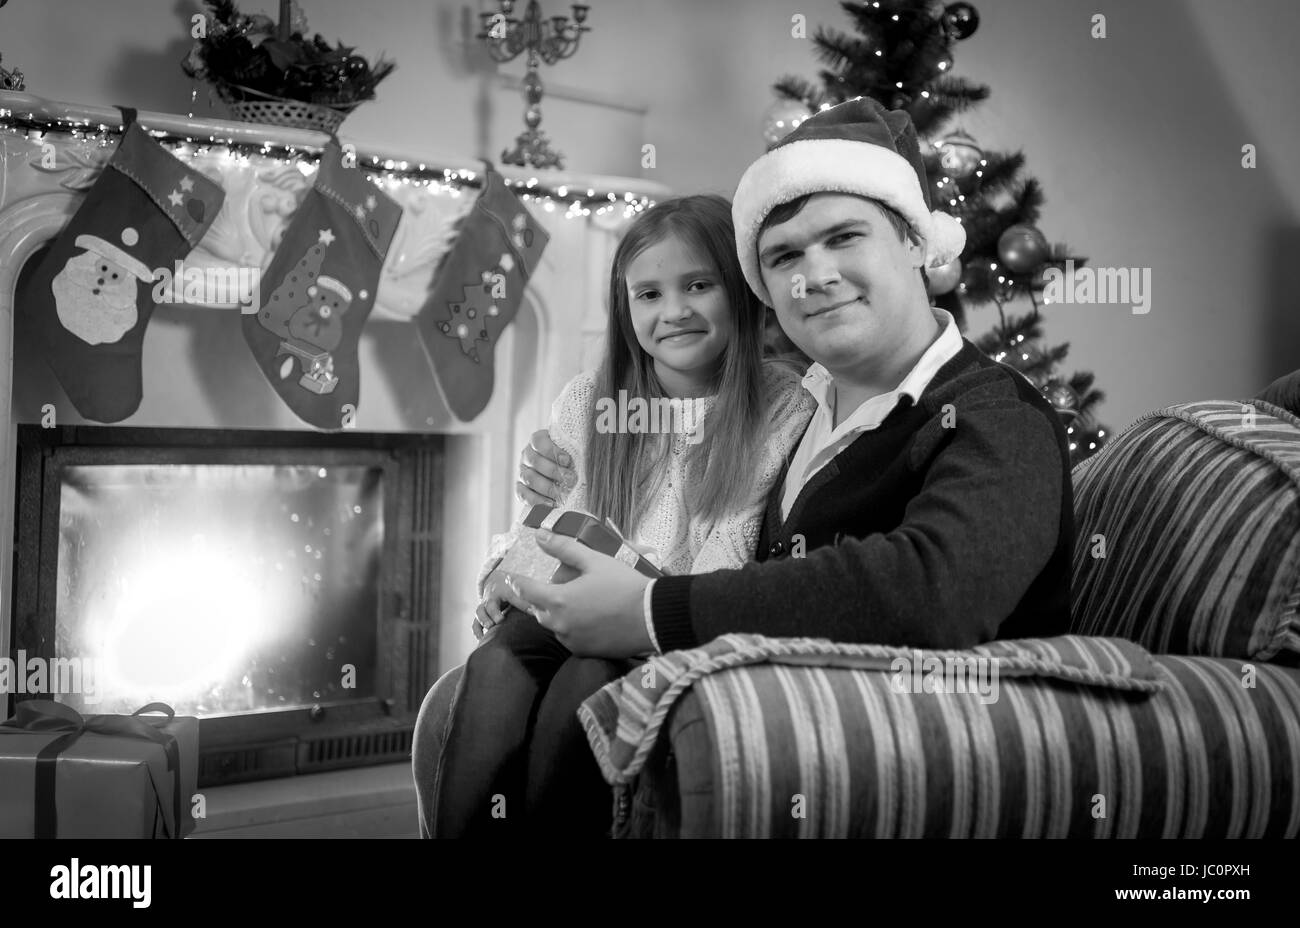 Black and white portrait of happy man and girl sitting at fireplace at Christmas Stock Photo